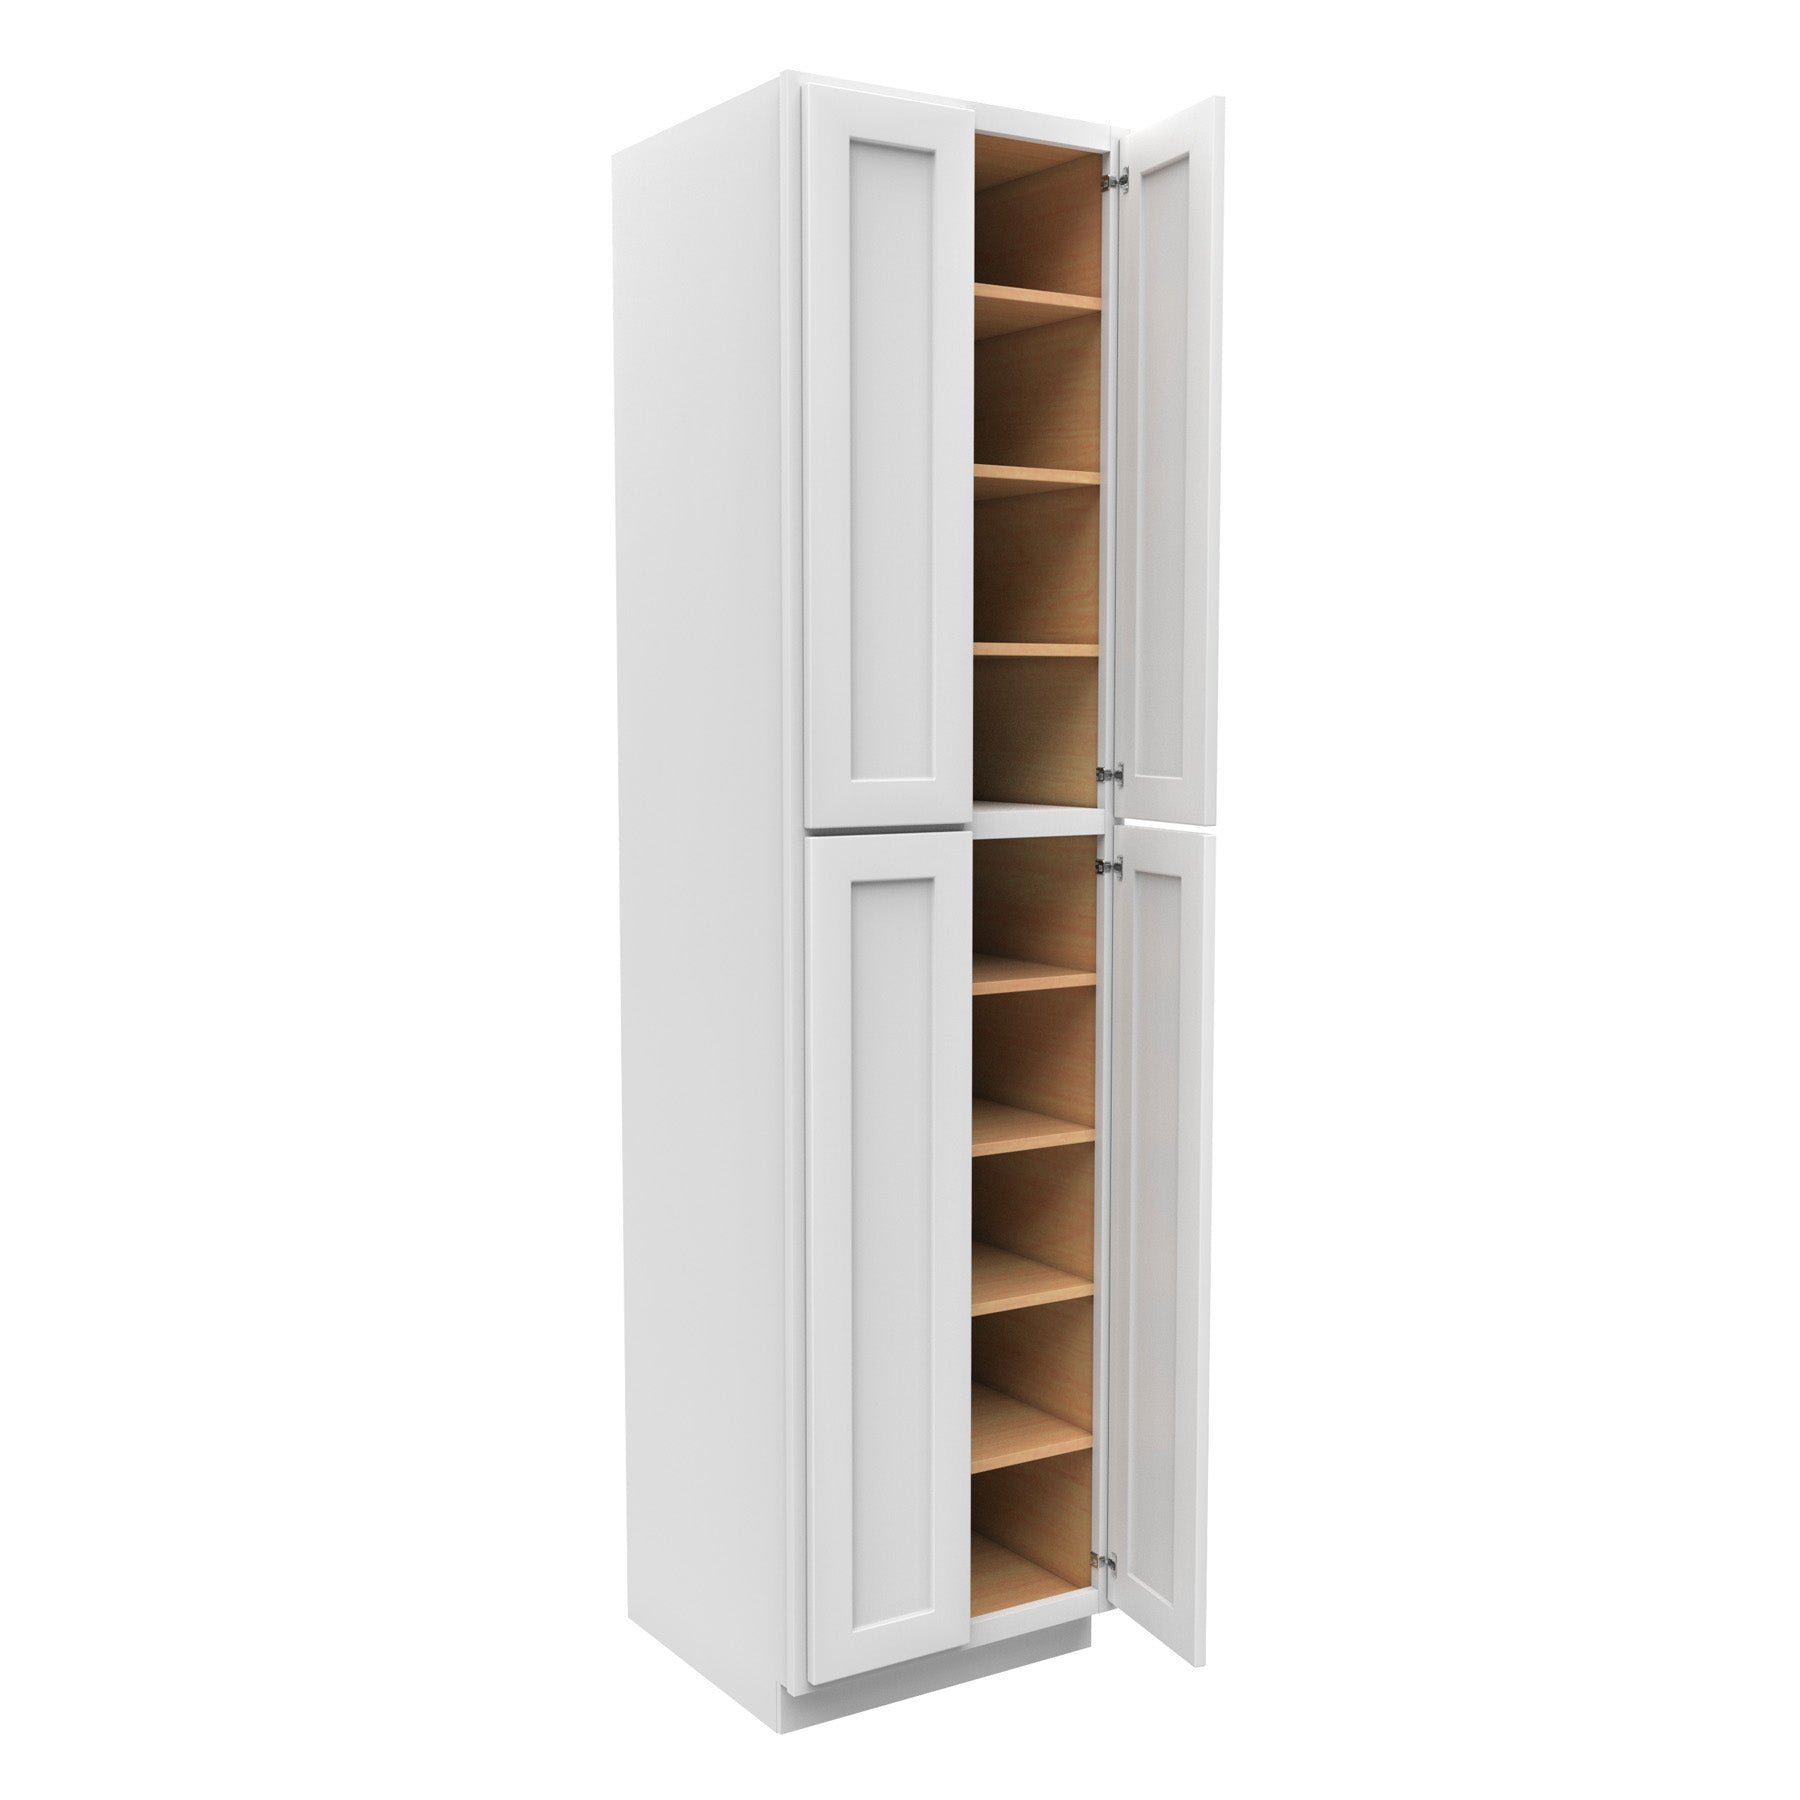 altijd stam Conform 96 Inch High Pantry Cabinet With Double Door - Luxor White Shaker - Re